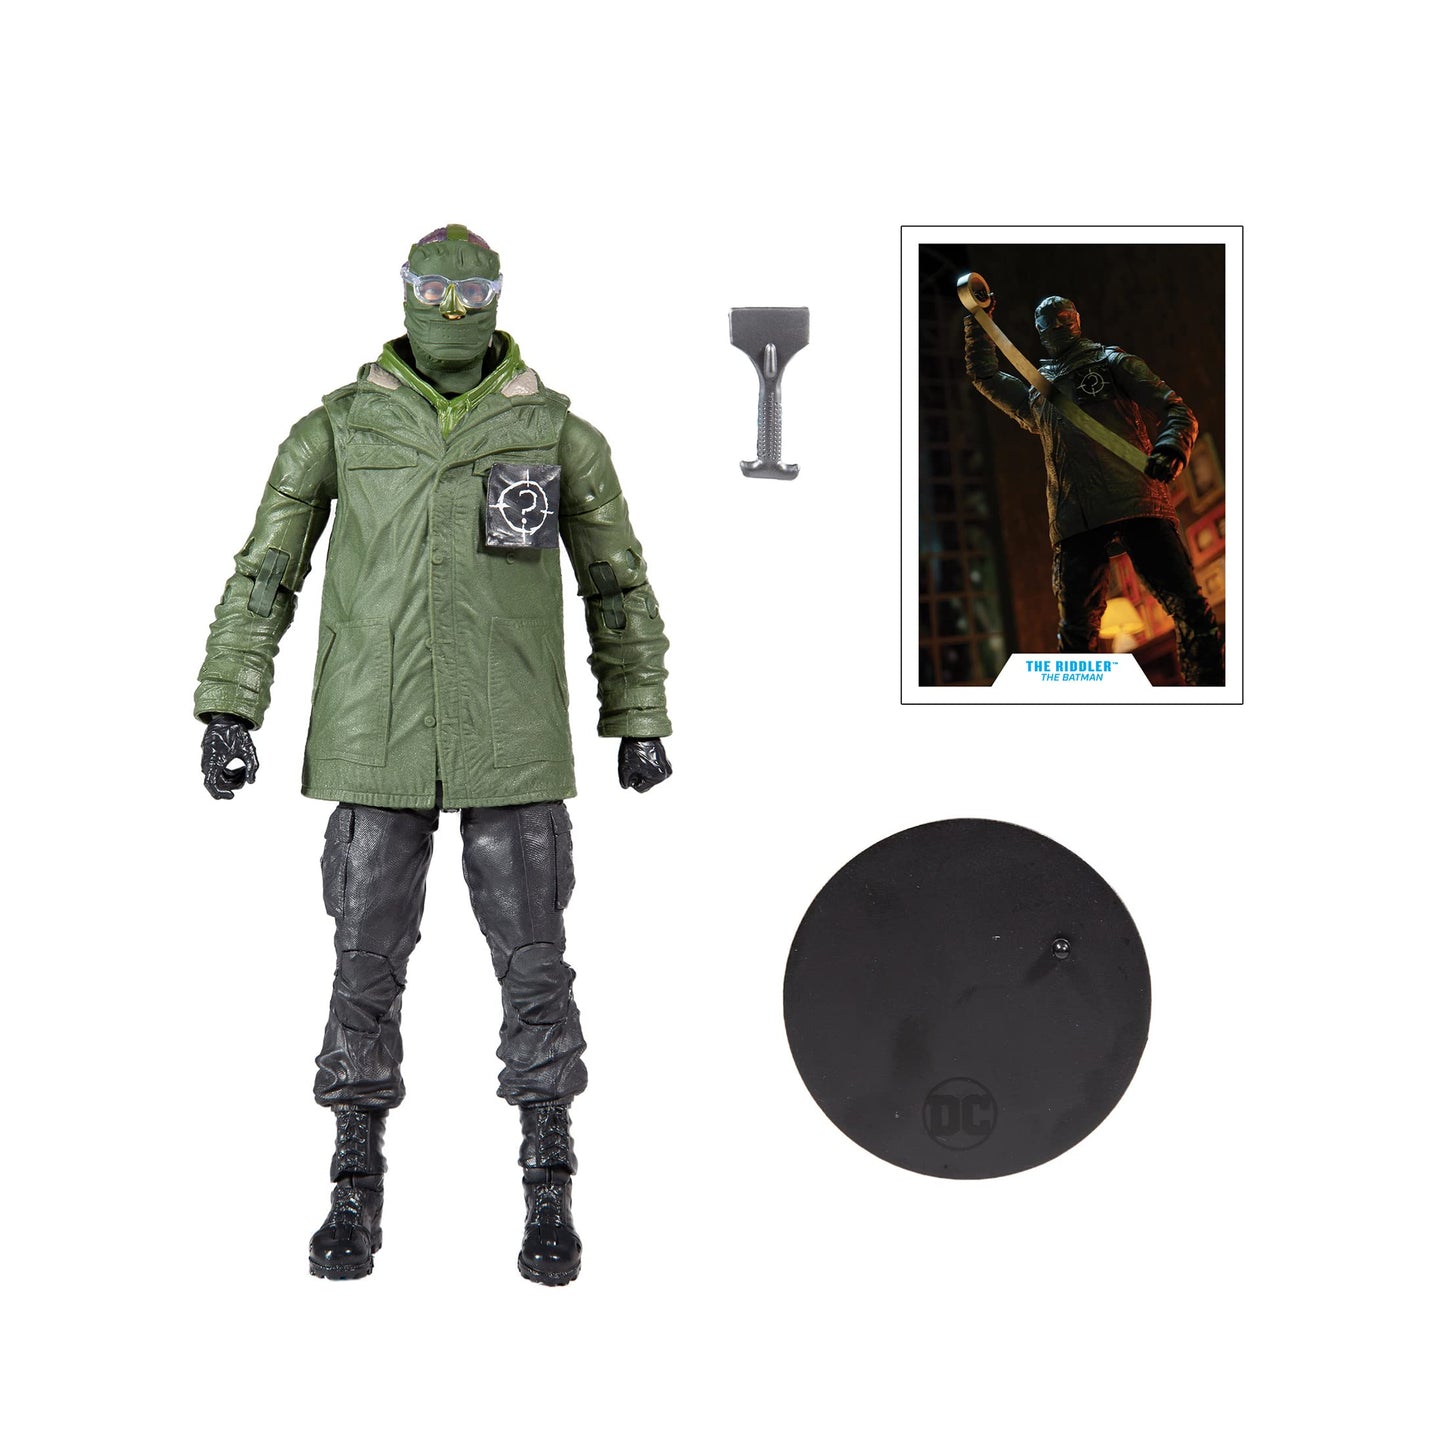 McFarlane Toys DC The Riddler: The Batman (Movie) 7 inch Action Figure with Accessories